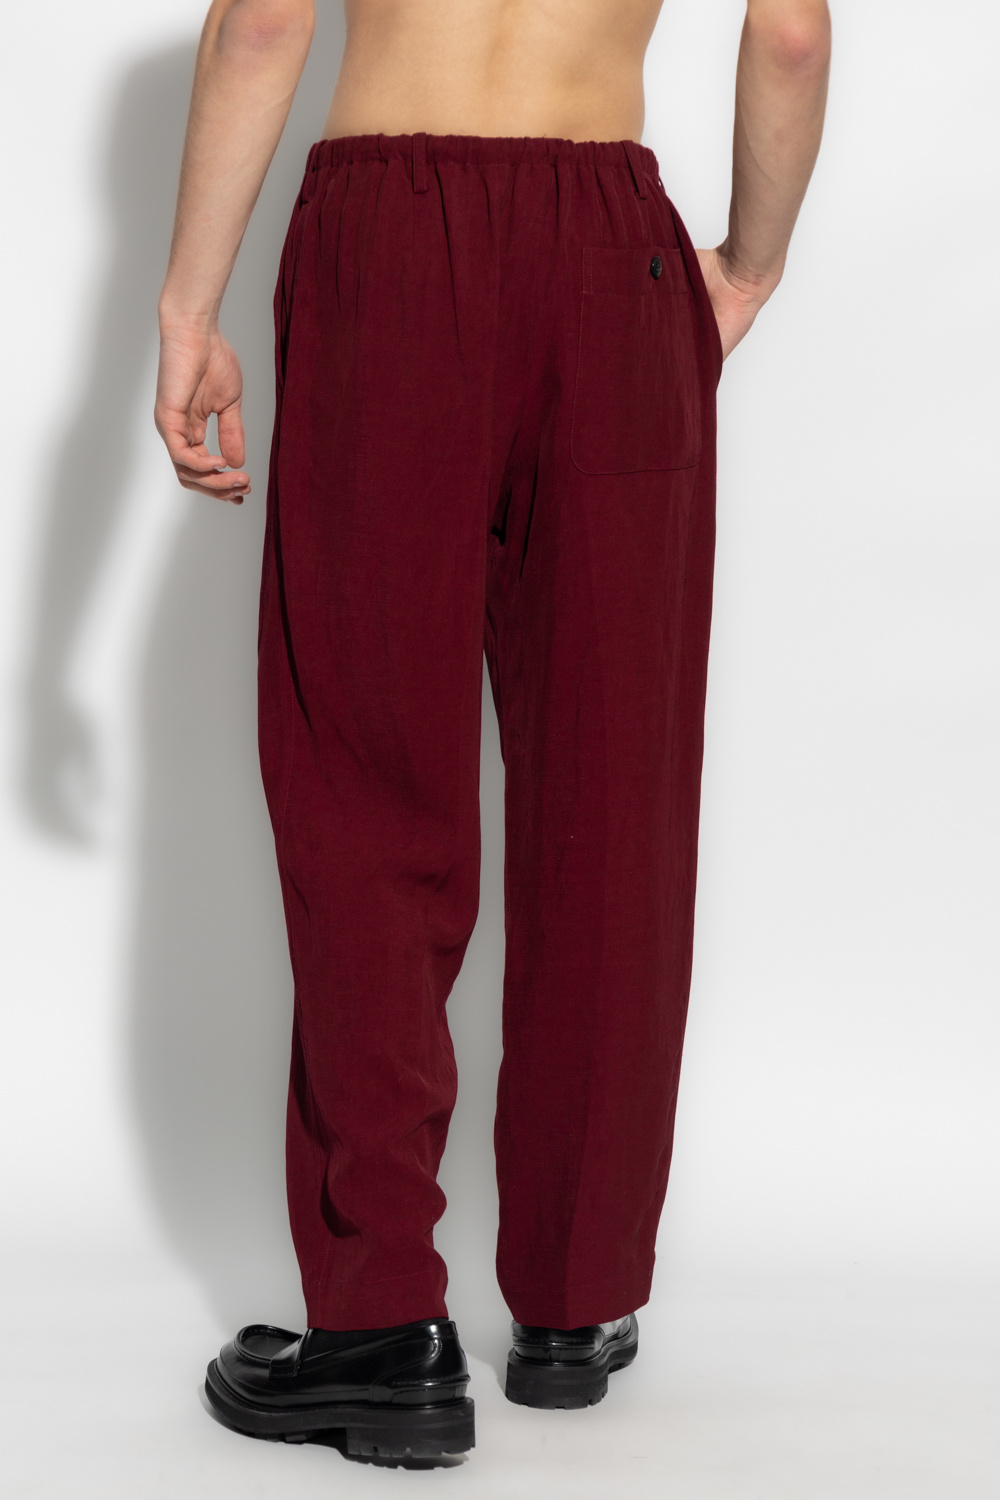 Dries Van Noten Relaxed-fitting trousers